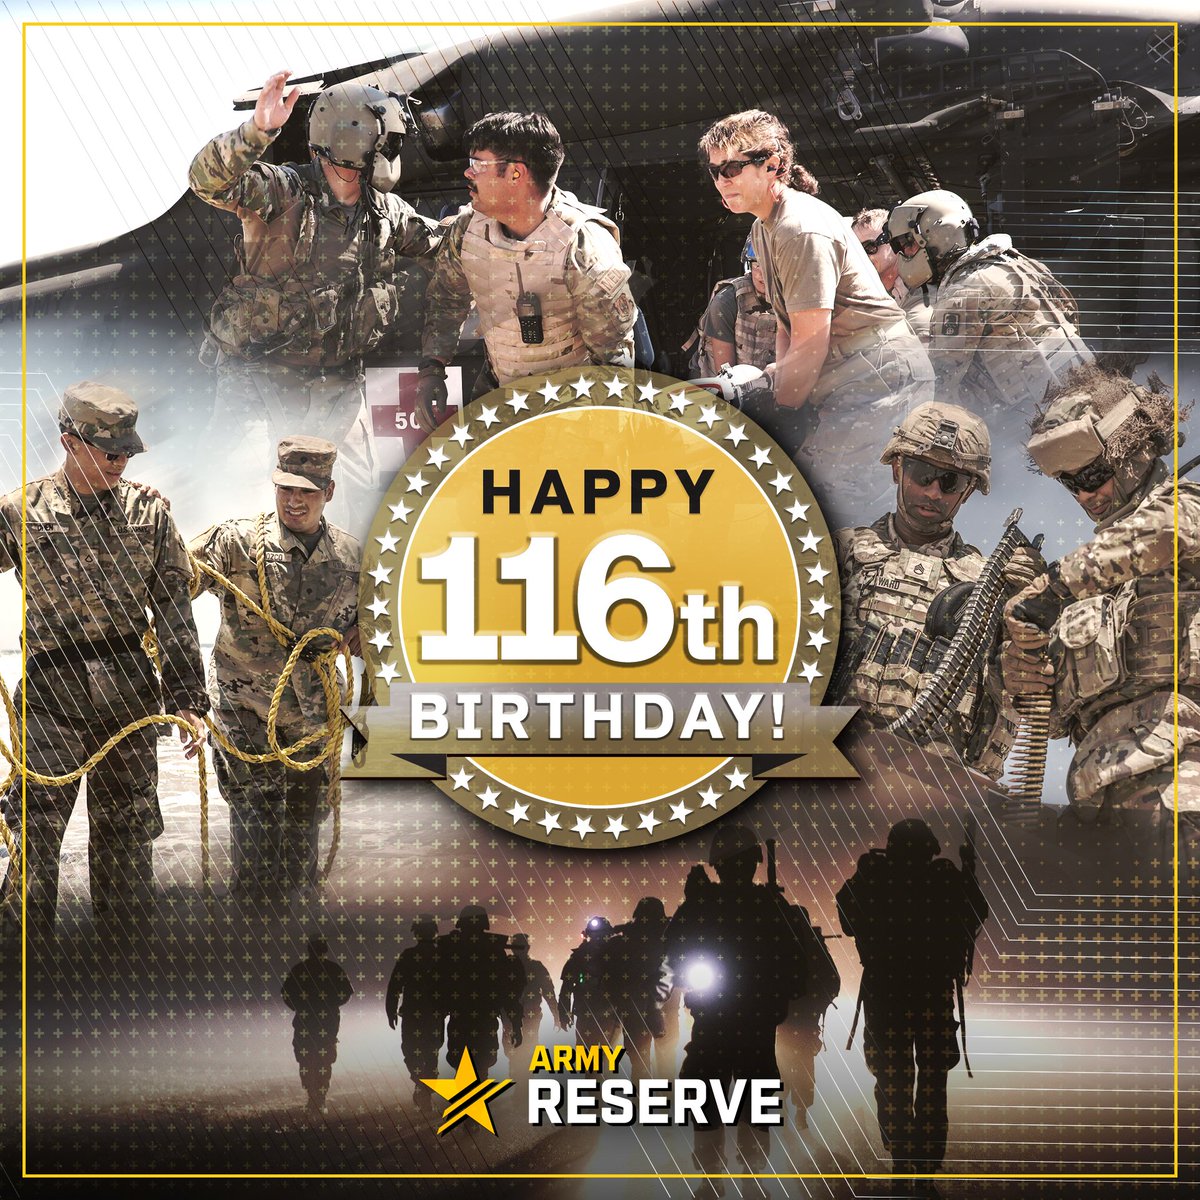 Yesterday, the U.S. Army Reserve celebrated its 116th Birthday. Thank you to all the reservists who keep our nation safe. #USARBirthday116